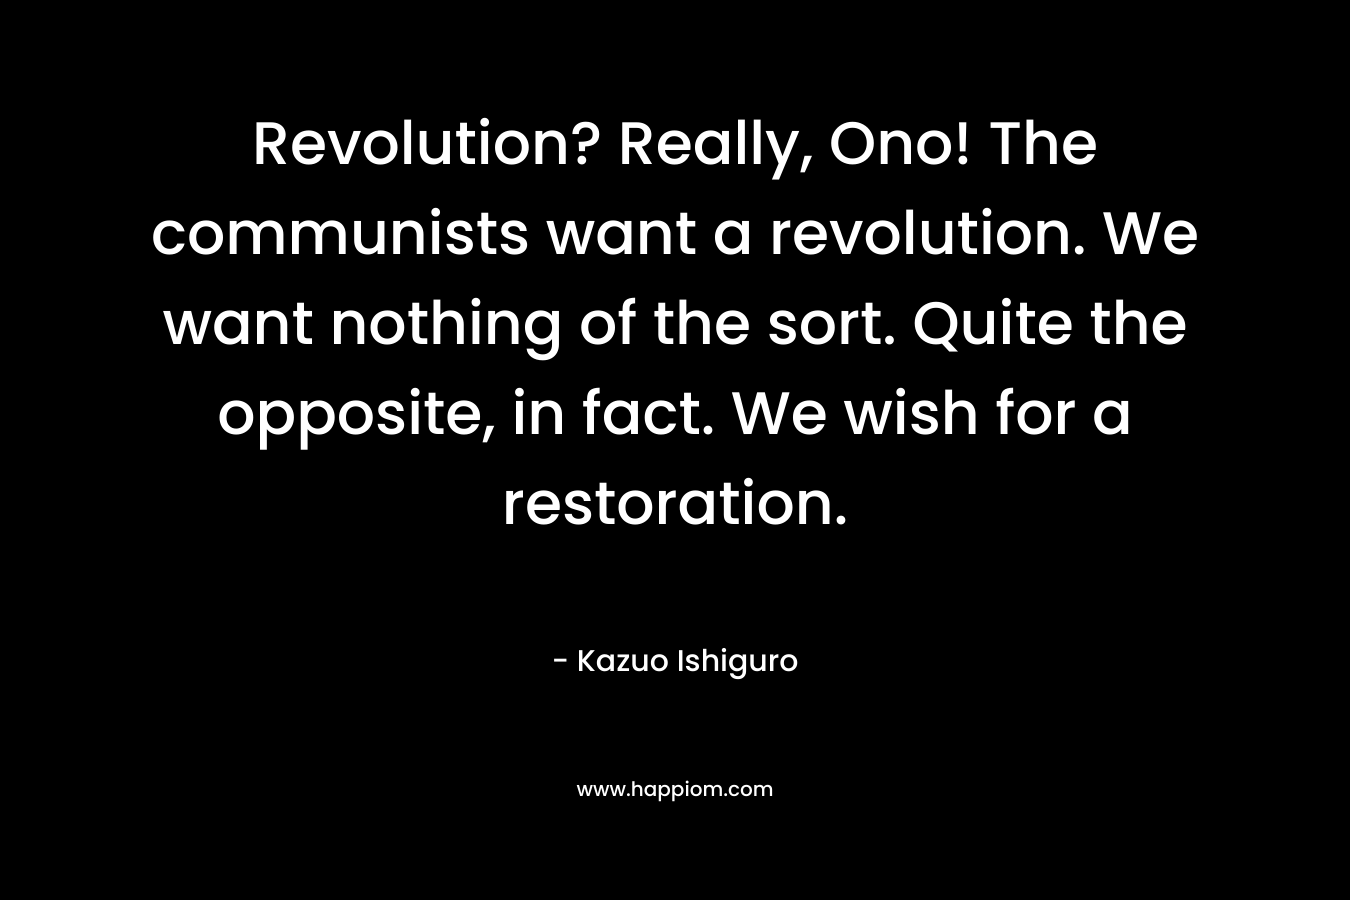 Revolution? Really, Ono! The communists want a revolution. We want nothing of the sort. Quite the opposite, in fact. We wish for a restoration. – Kazuo Ishiguro